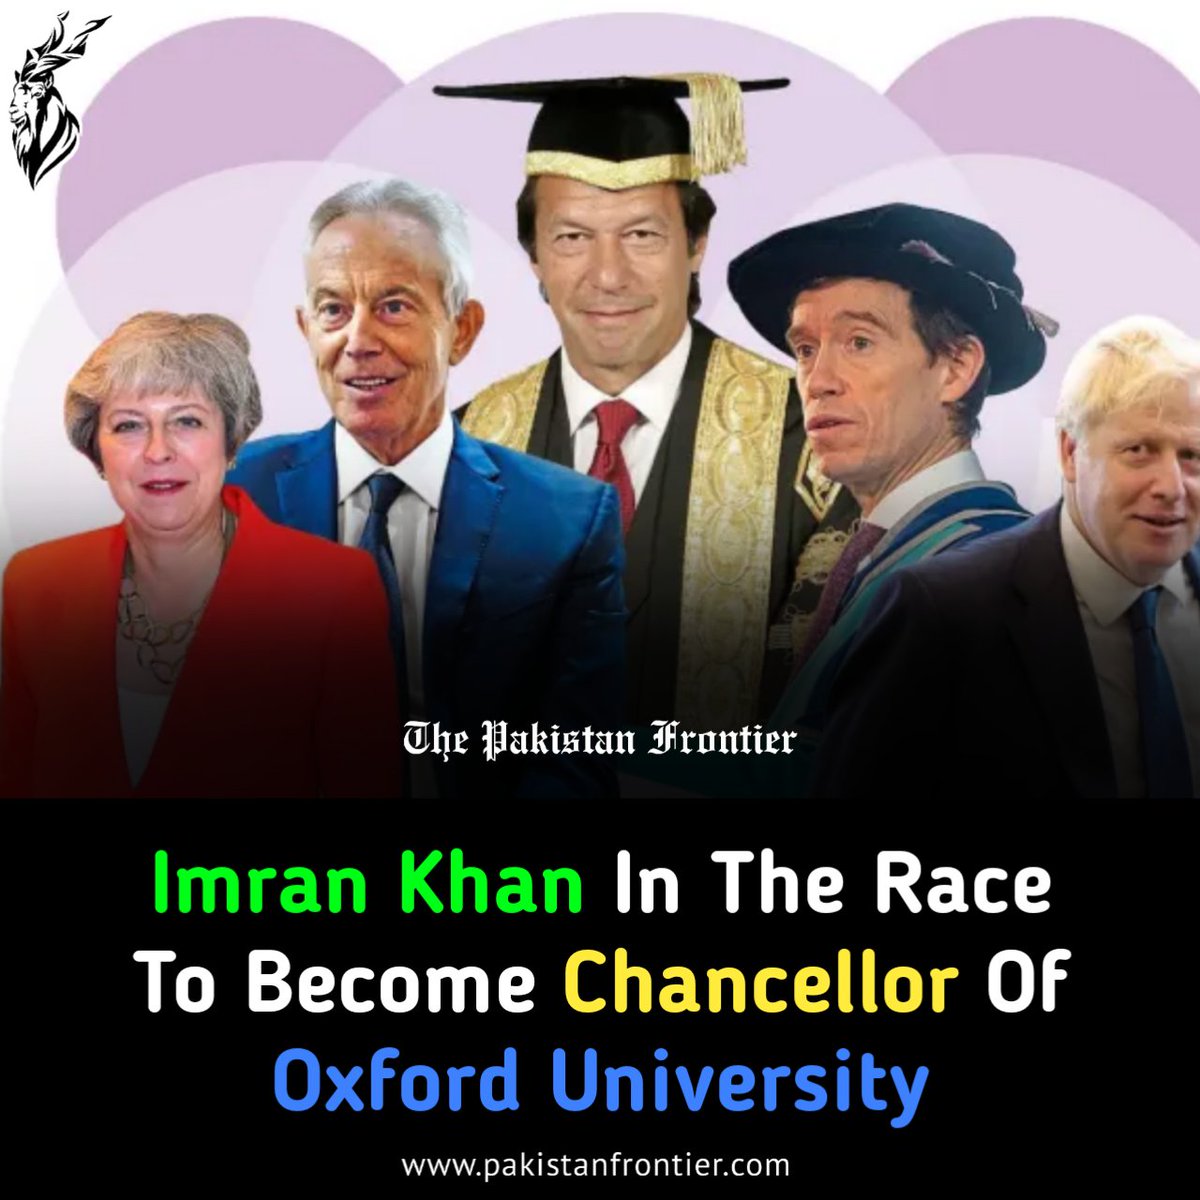 A race for the cushiest job in Britain opened up last night with the resignation of Chris Patten as Chancellor of Oxford University.
More wild-card candidates include Imran Khan, the former Pakistani PM and cricketer.
Others including Theresa May and Boris Johnson.
#ImranKhan…